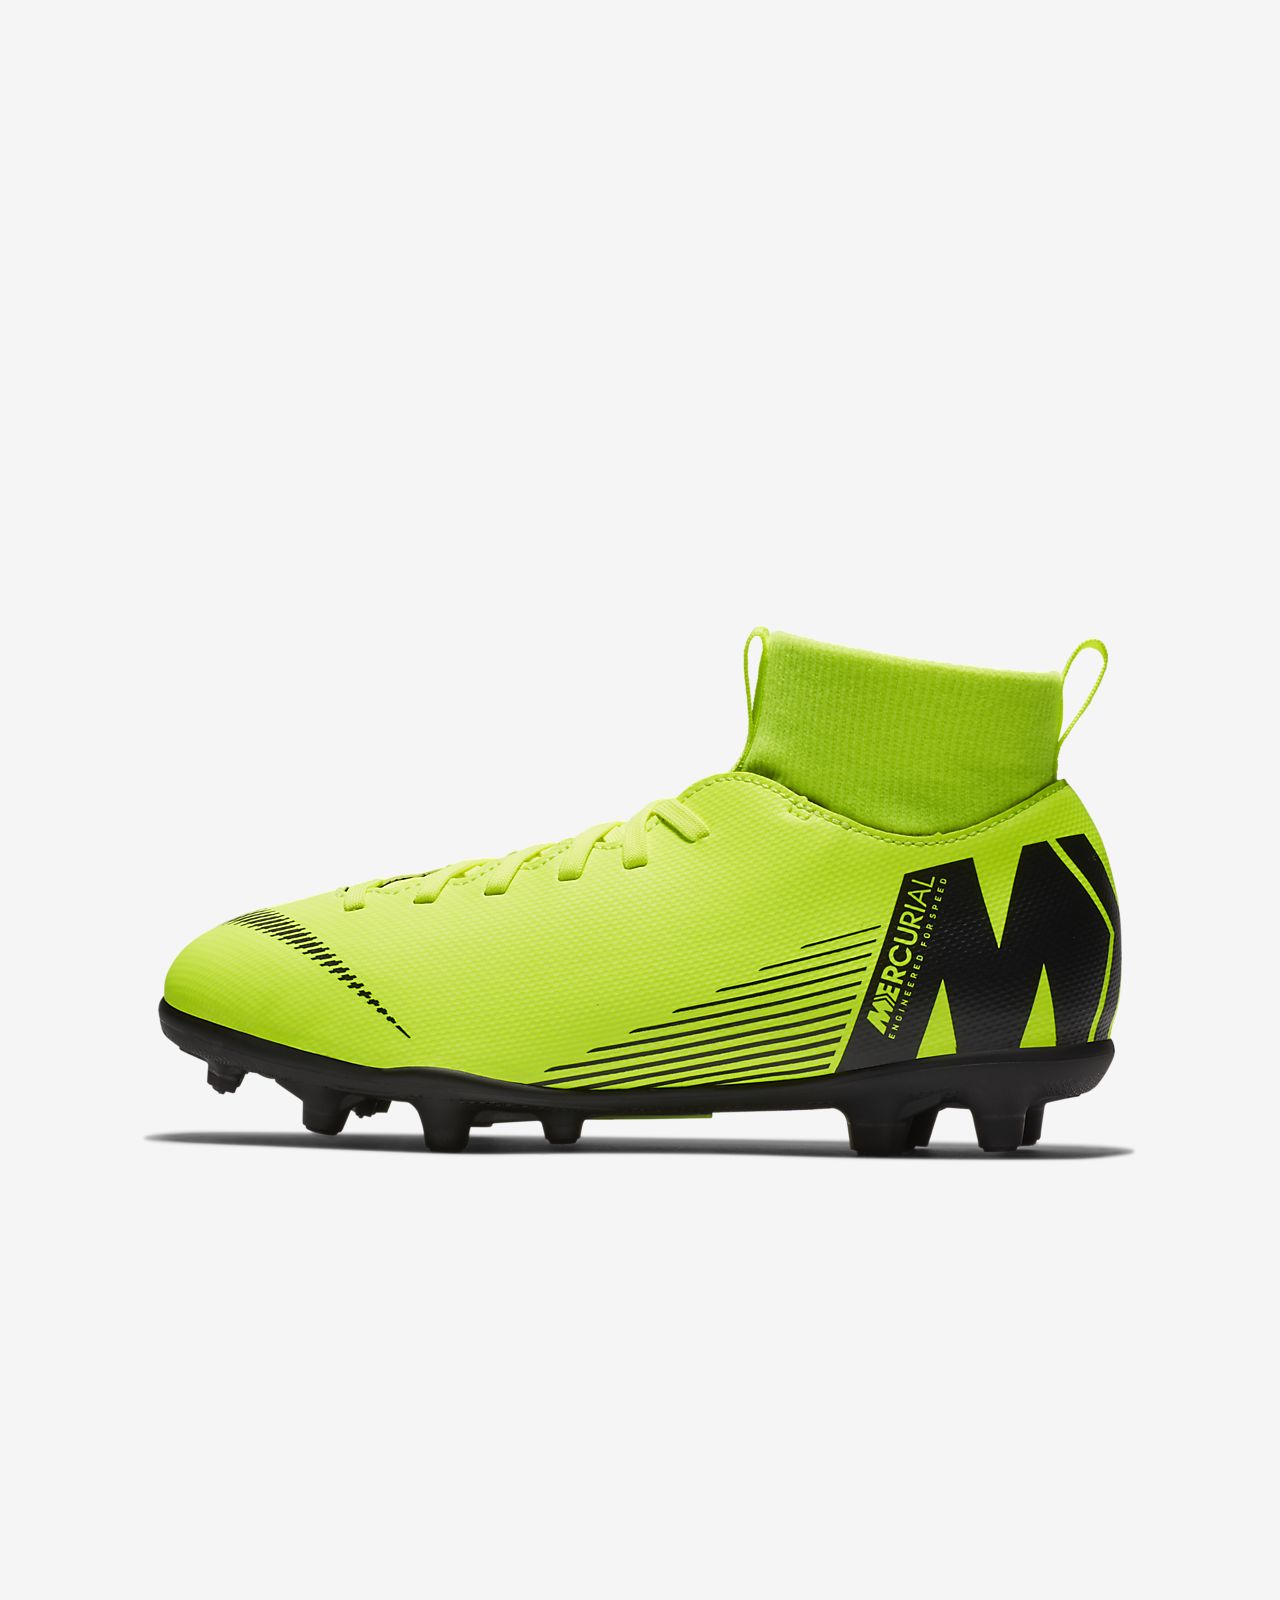 Nike Mercurial Superfly 6 Pro FG Products Football shoes